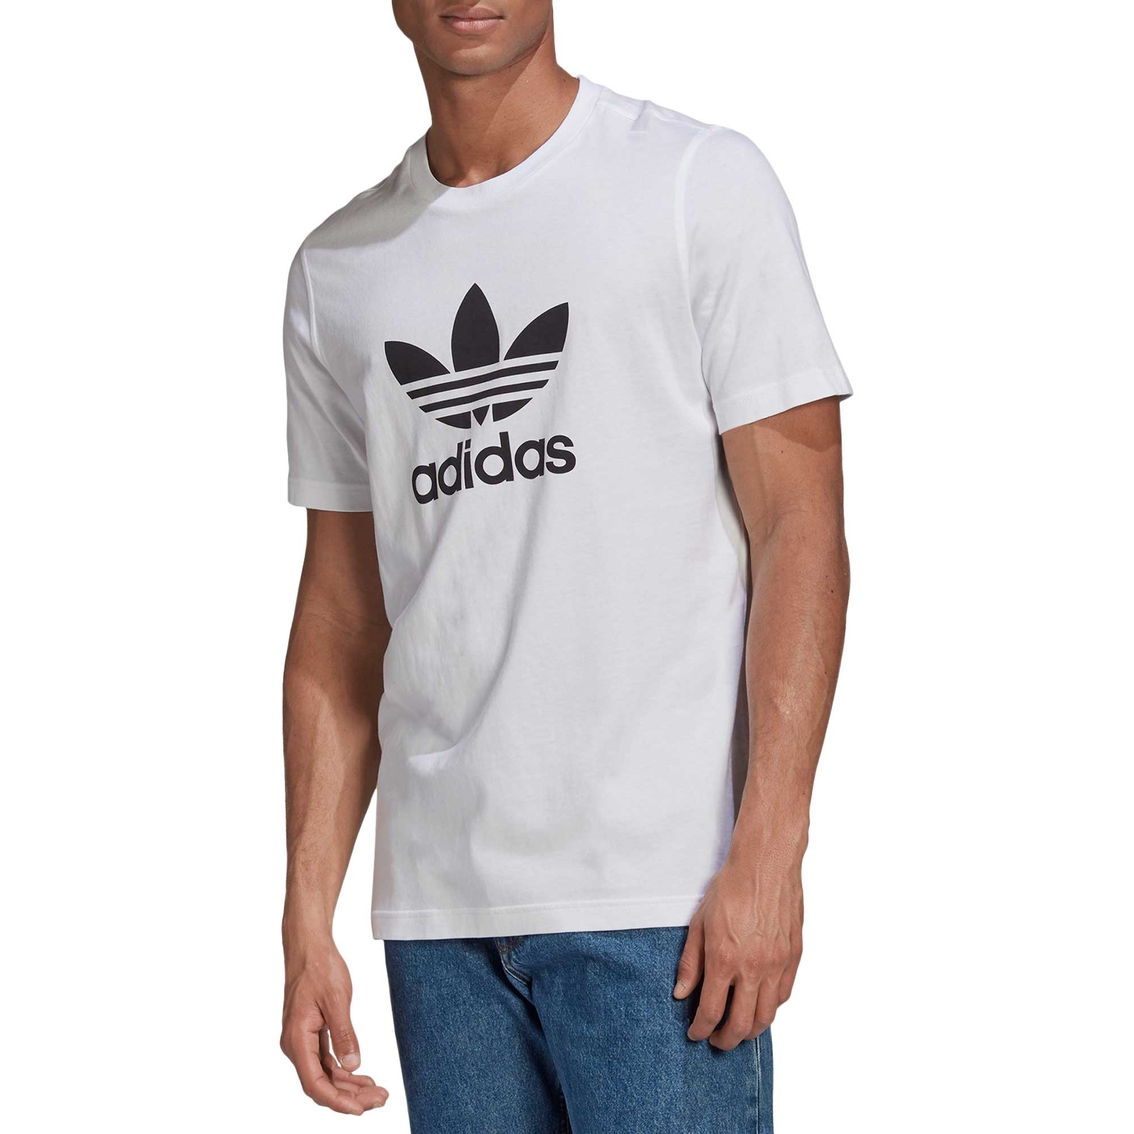 Adidas Trefoil Tee | Shirts | Clothing & Accessories | Shop The Exchange